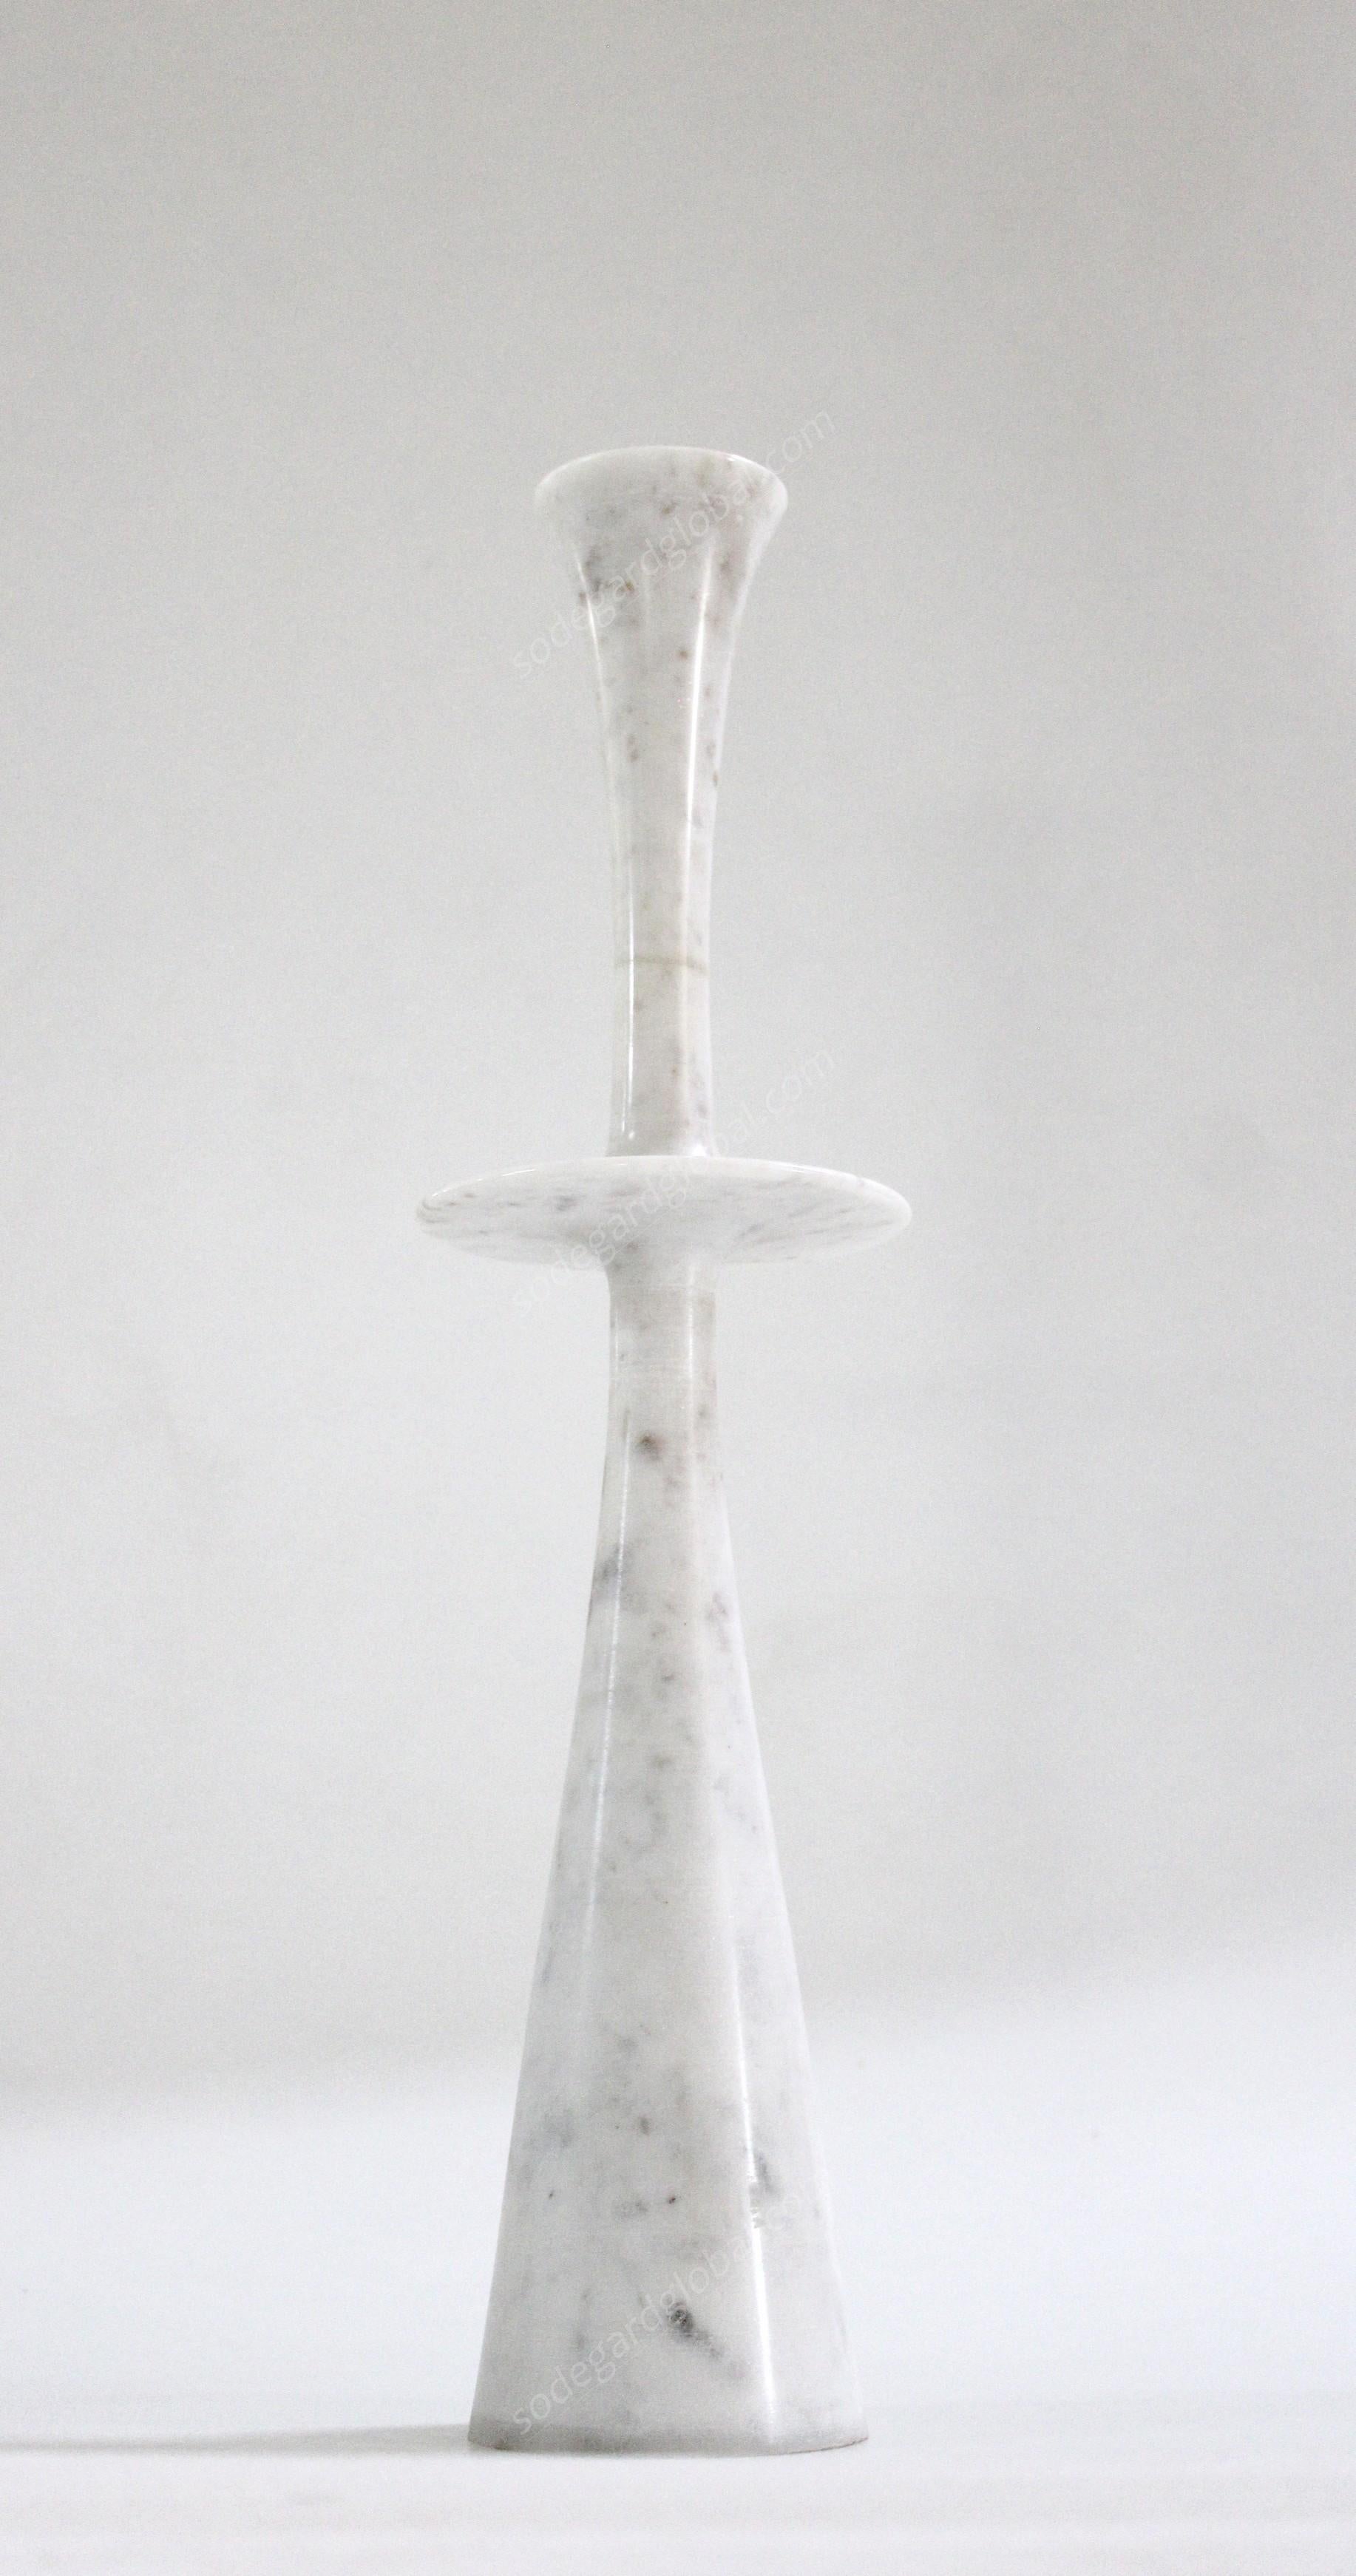 Paul Mathieu designed these elegant candlesticks for Stephanie Odegard Co. Ltd. Solid pieces of marble are turned to create these delicate designs namely Ove, Flute, Plat I and Plat II.

Candlesticks Plate i
Size-  6” x 6” x 23” H.
Materials - White